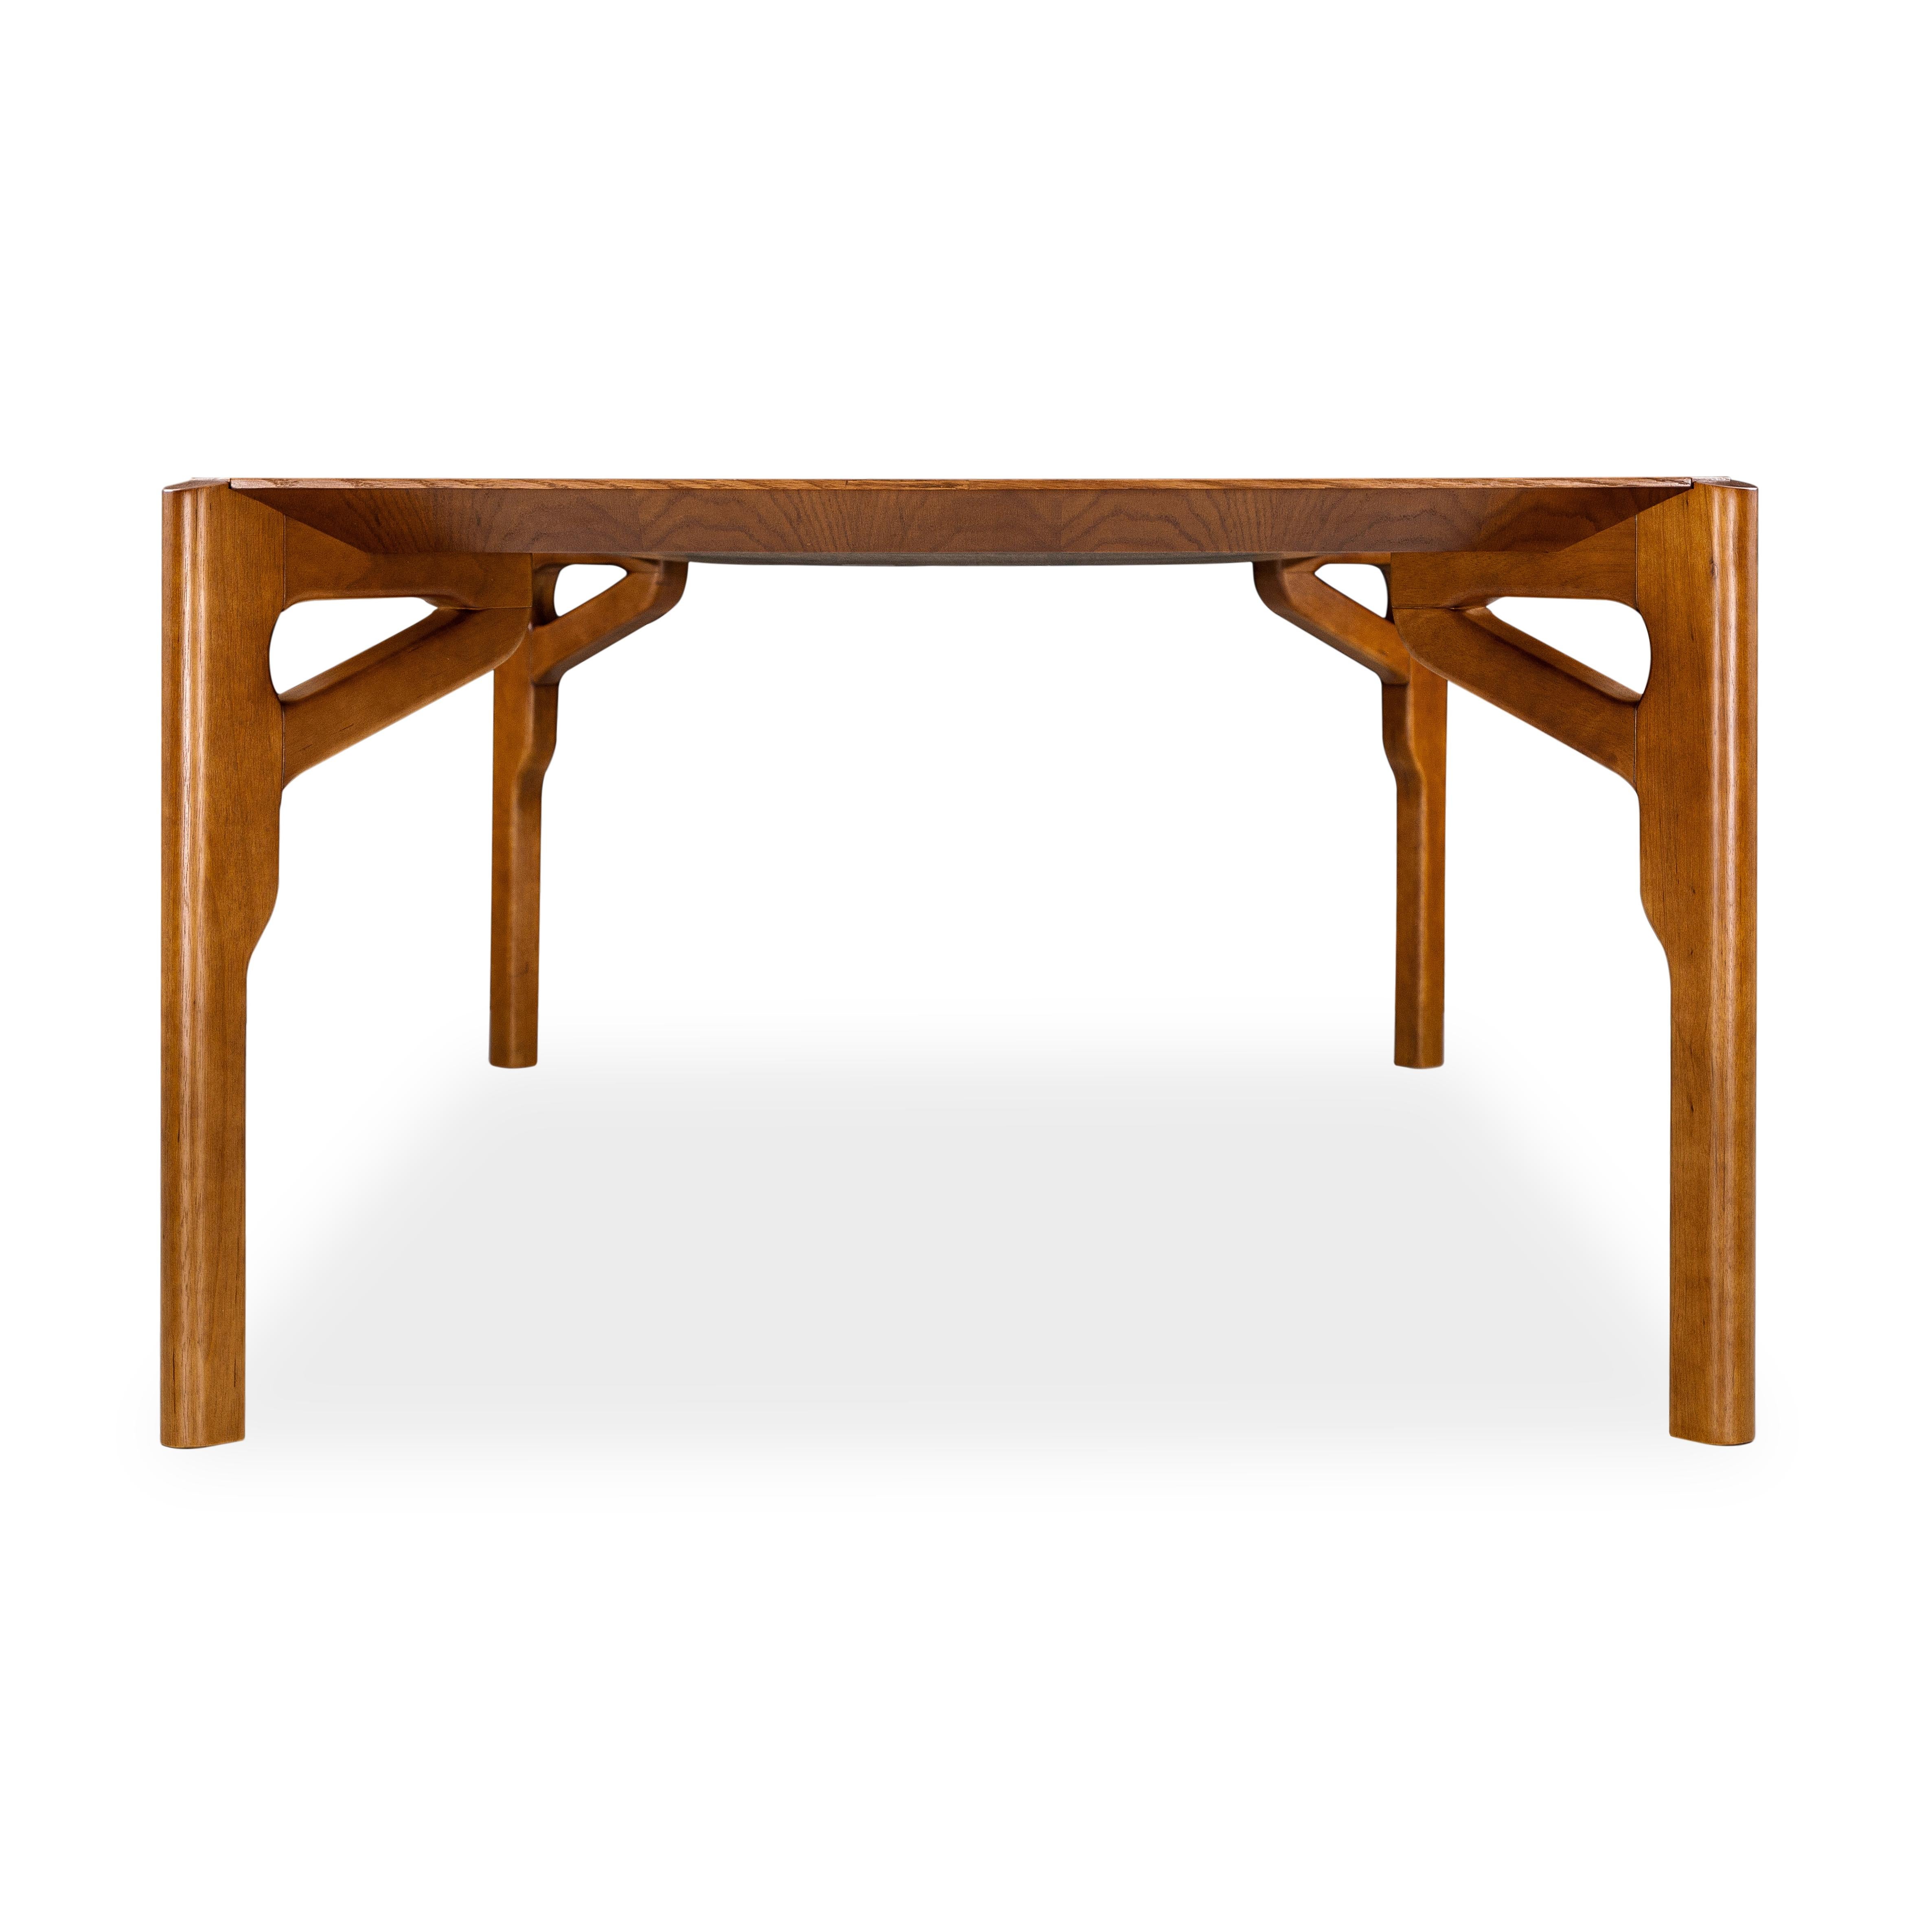 Contemporary Hawk Dining Table with an Almond Oak Wood Veneered Table Top 86'' For Sale